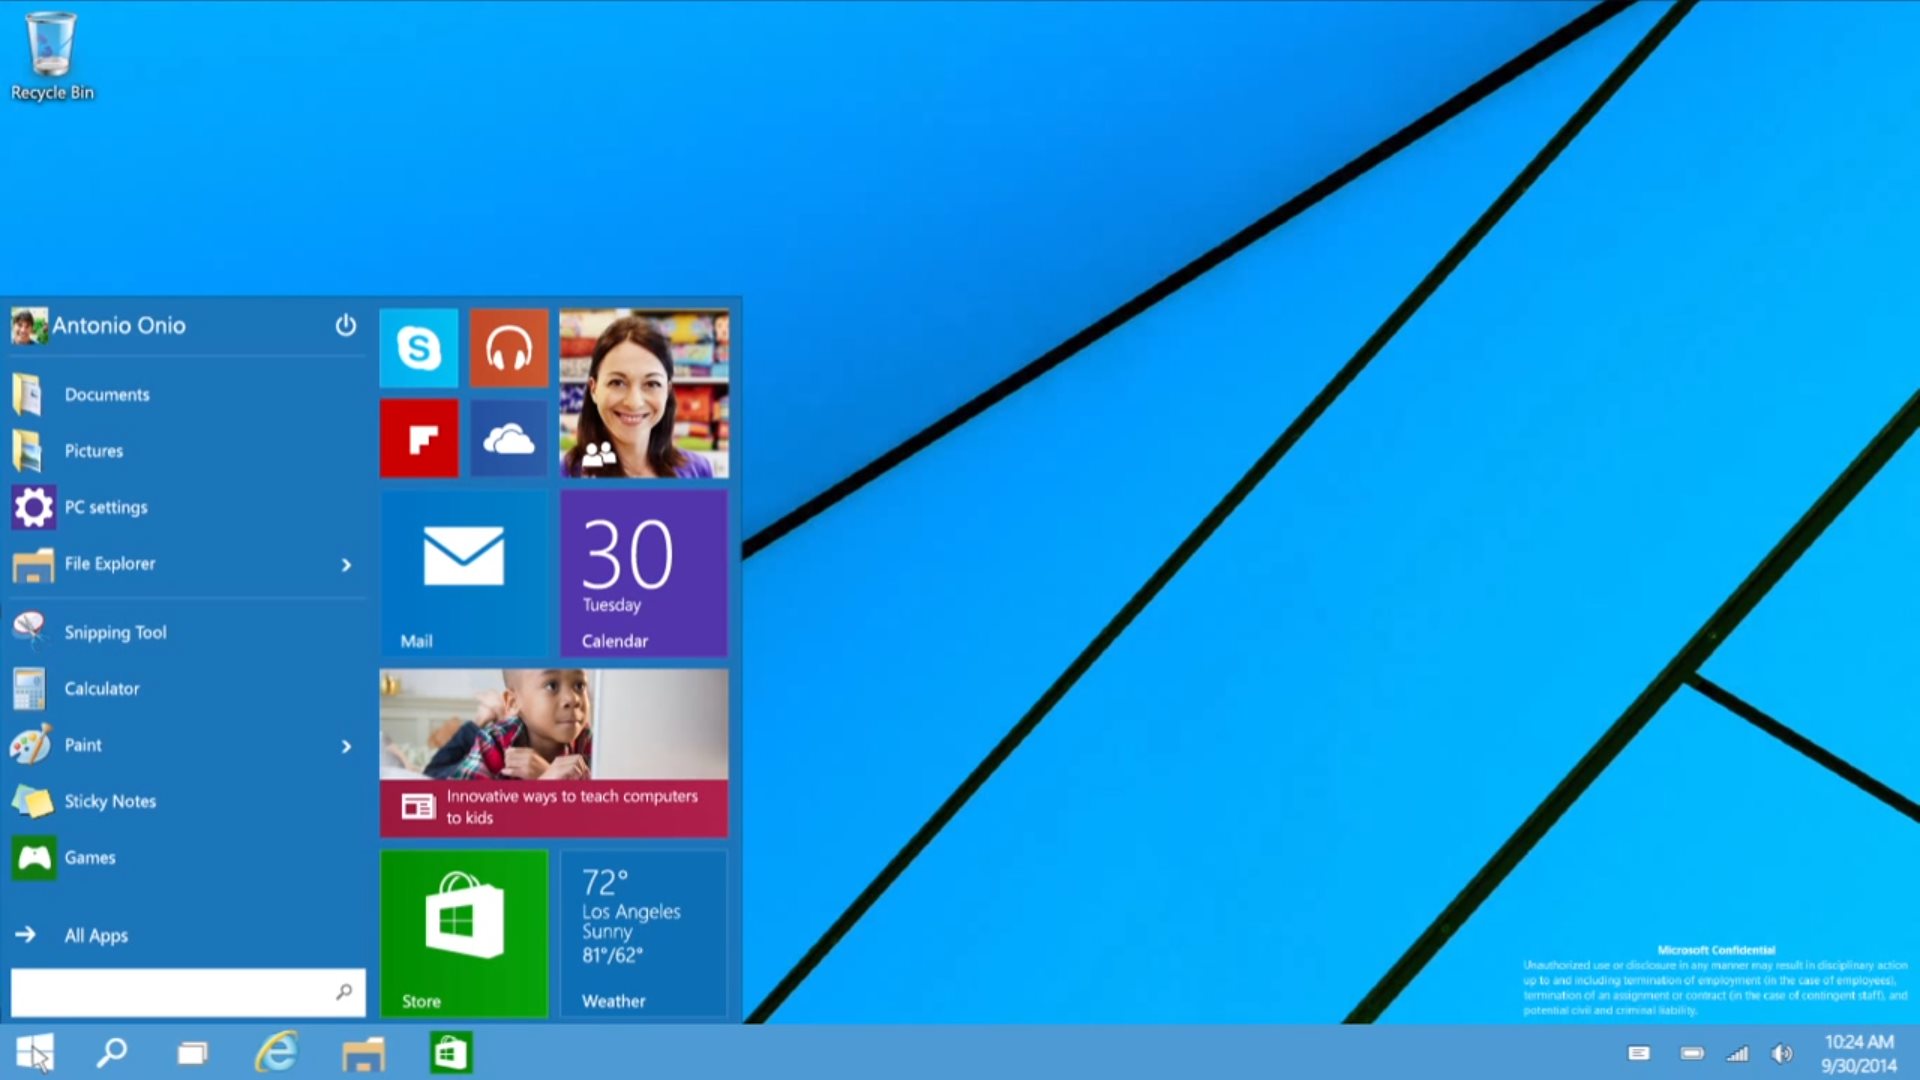 windows-10-quot-continuum-quot-revealed-in-official-video-460595-2.jpg